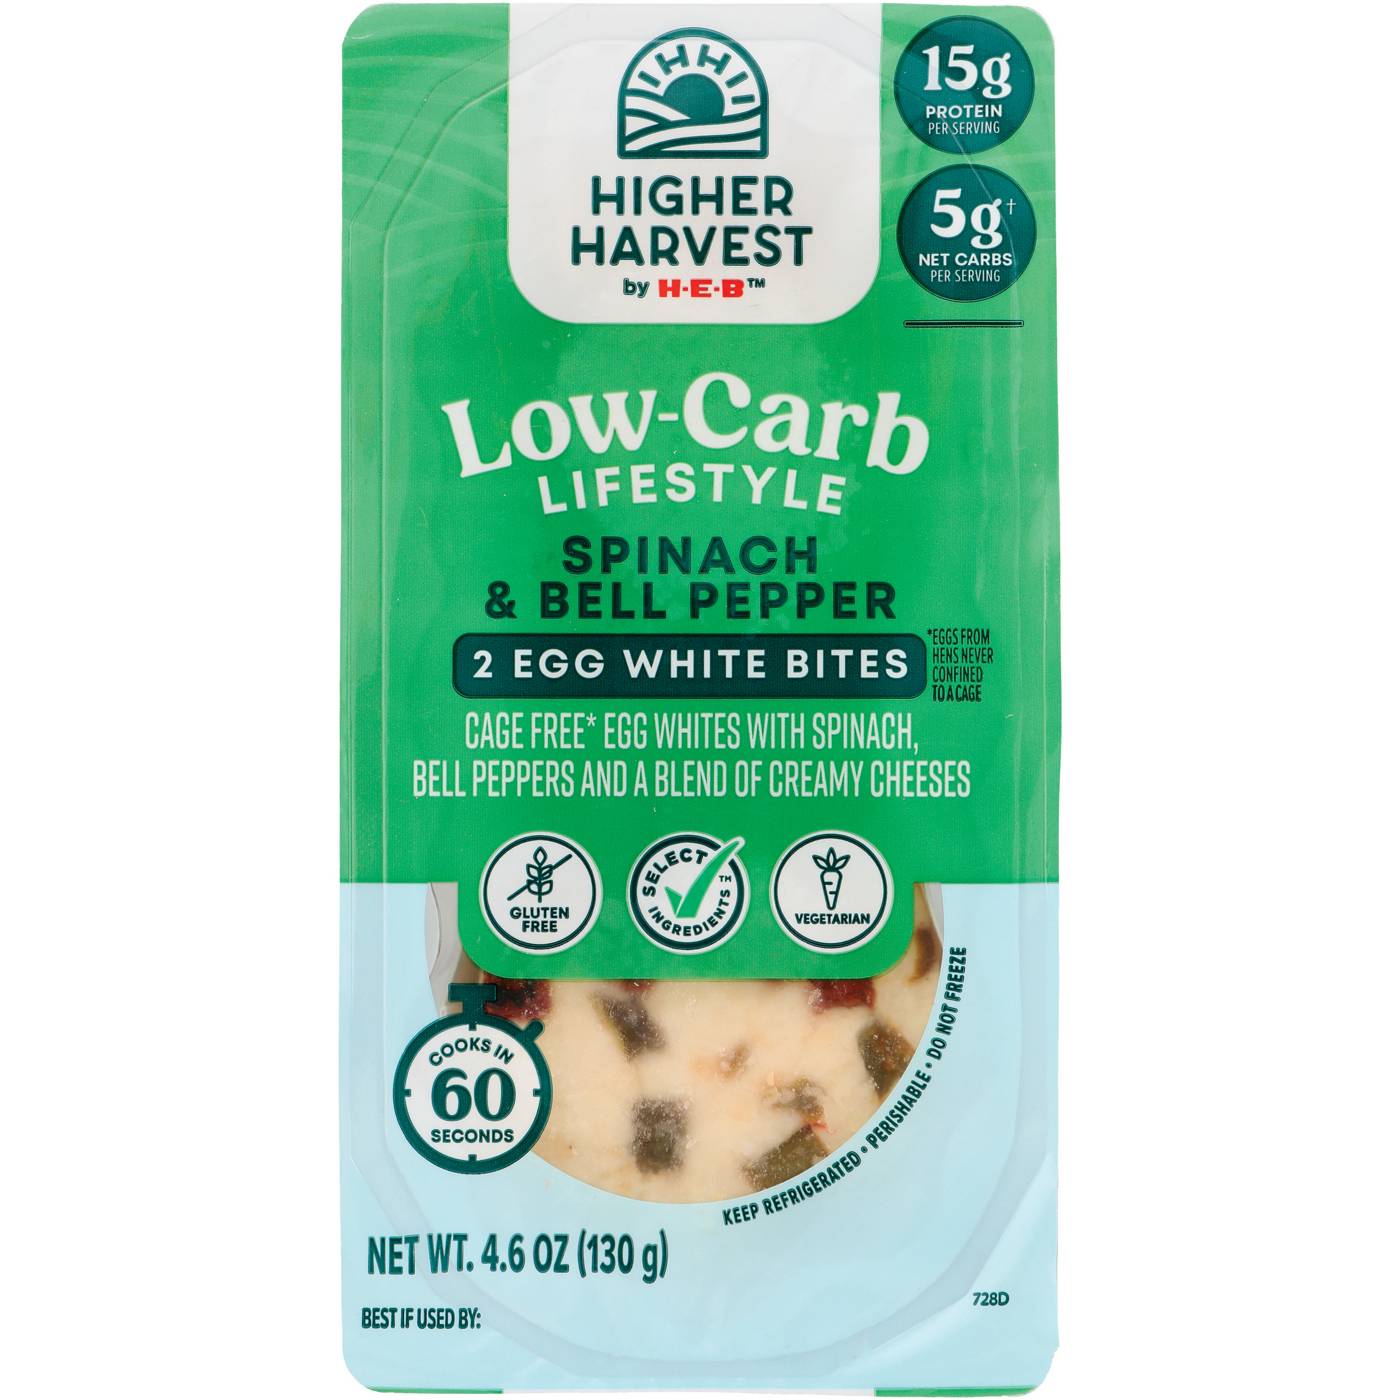 Higher Harvest by H-E-B Low-Carb Lifestyle Egg White Bites – Spinach & Bell Pepper; image 1 of 2